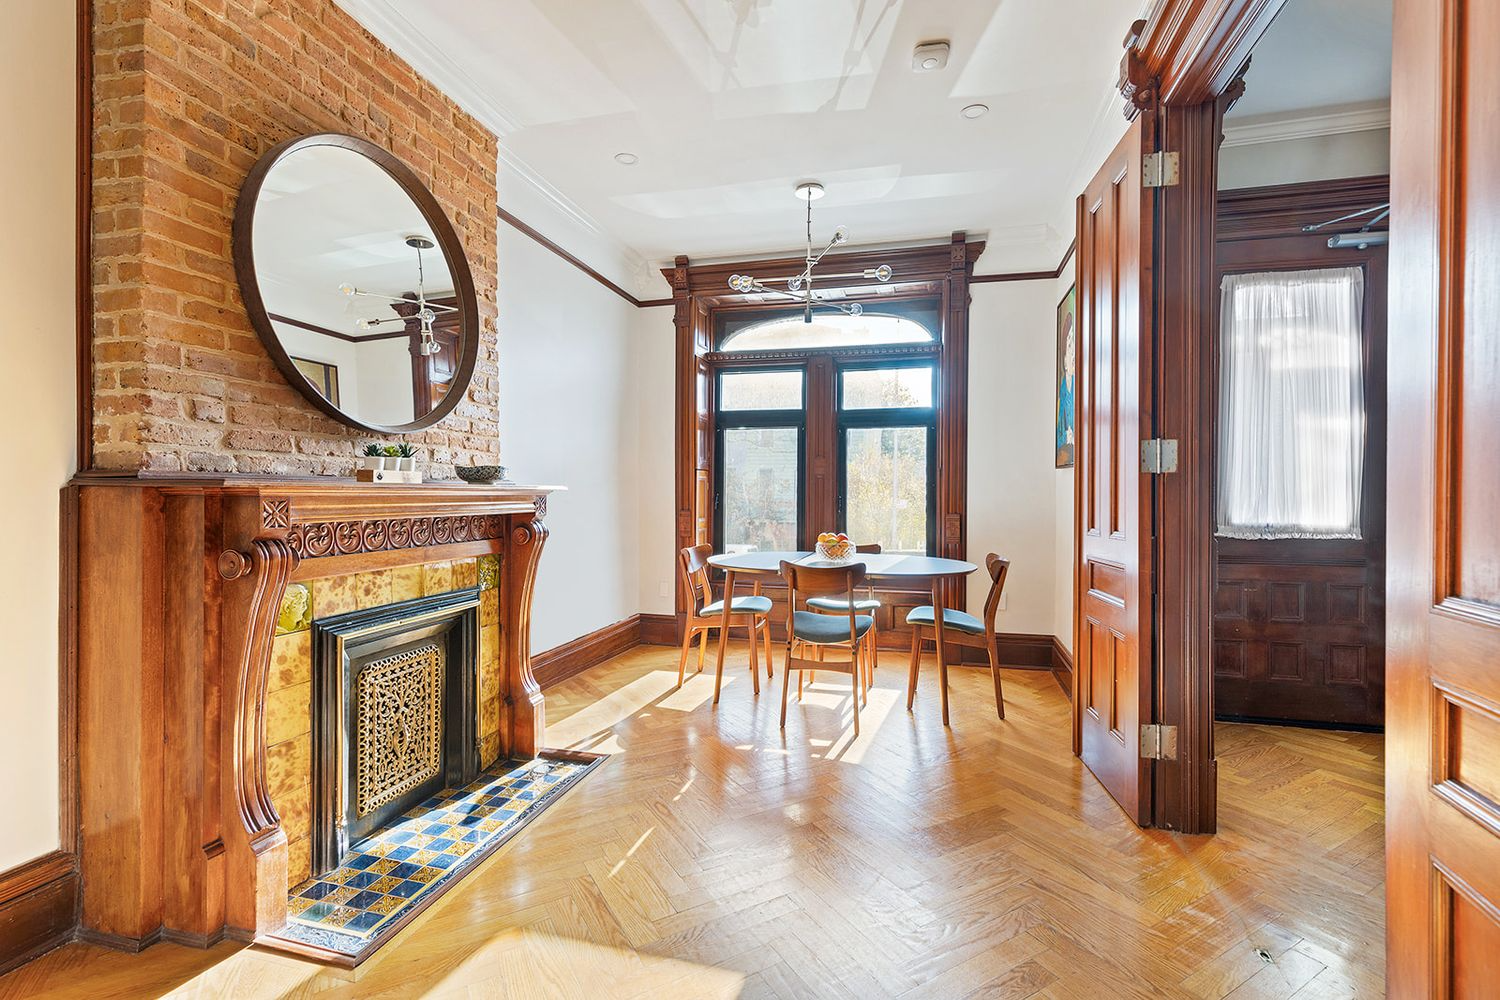 bed stuy - parlor with wood moldings and a mantel with original tile